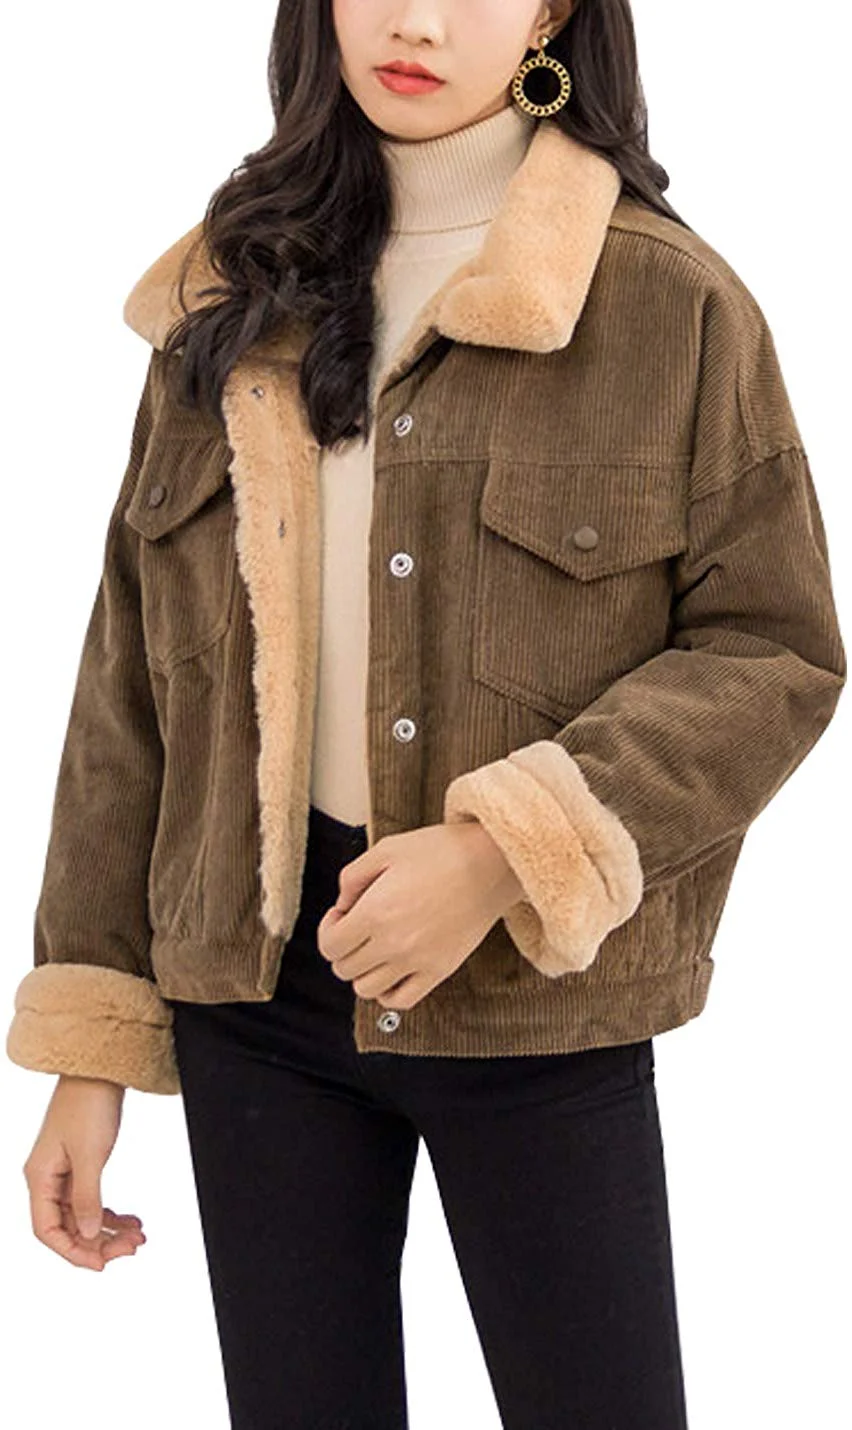 Women's Vintage Corduroy Sherpa Fleece Lined Jacket Thickened Warm Quilted Jacket